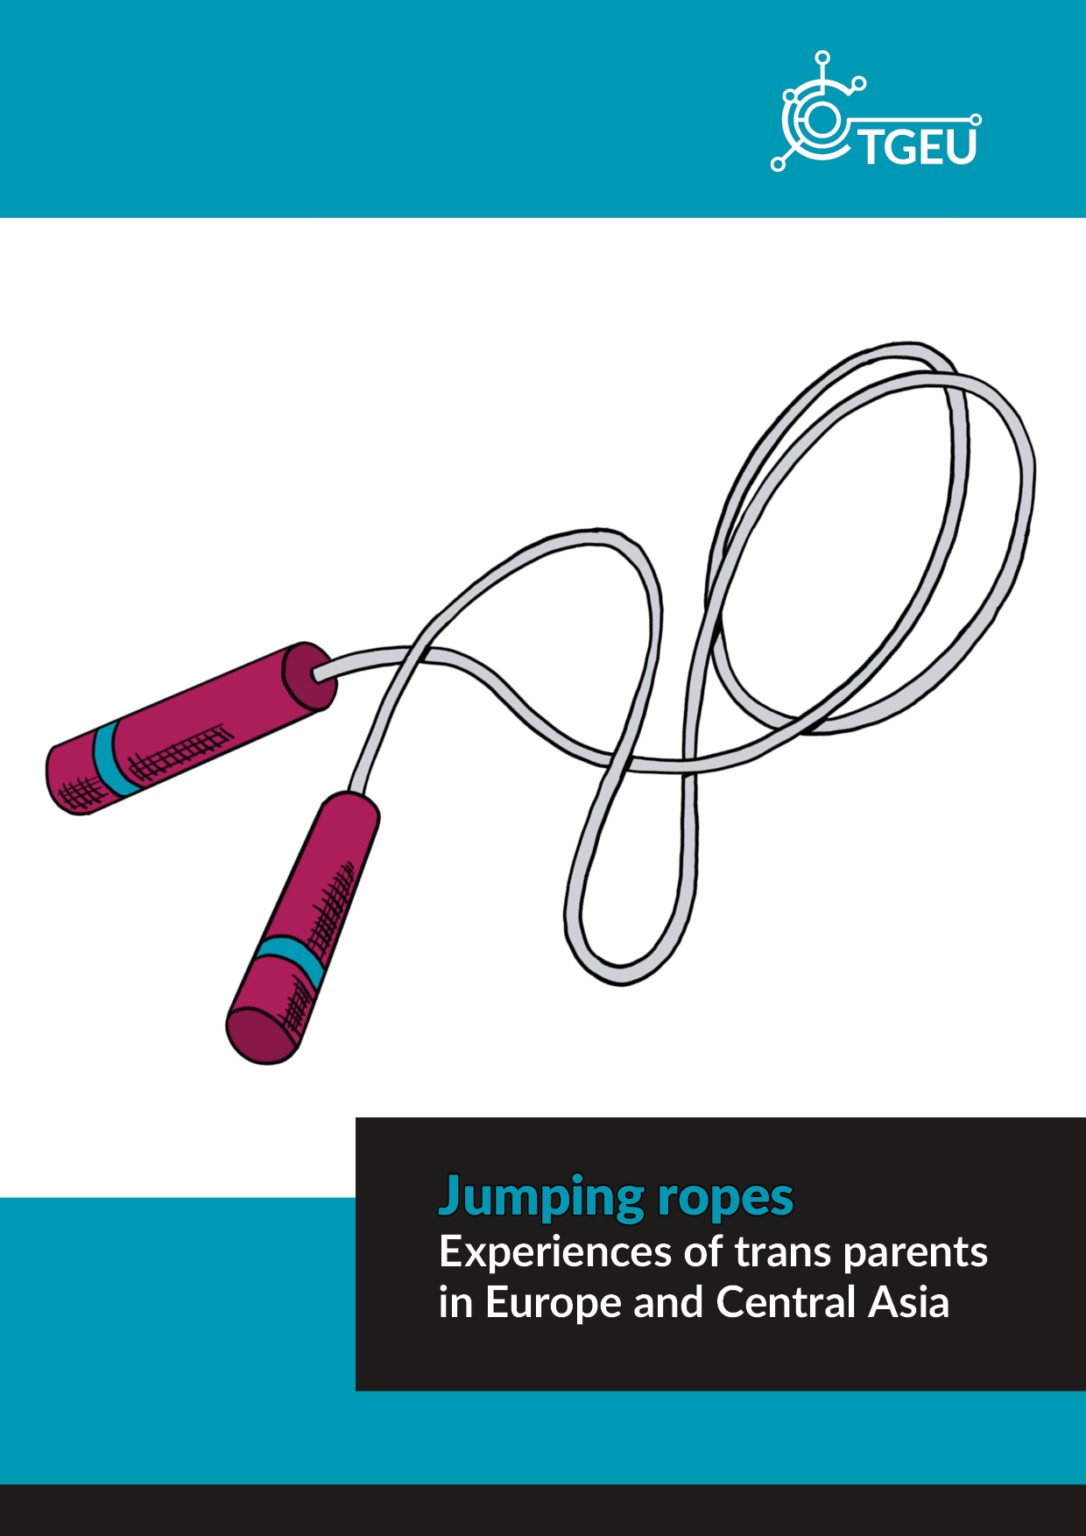 TGEU Jumping ropes report cover